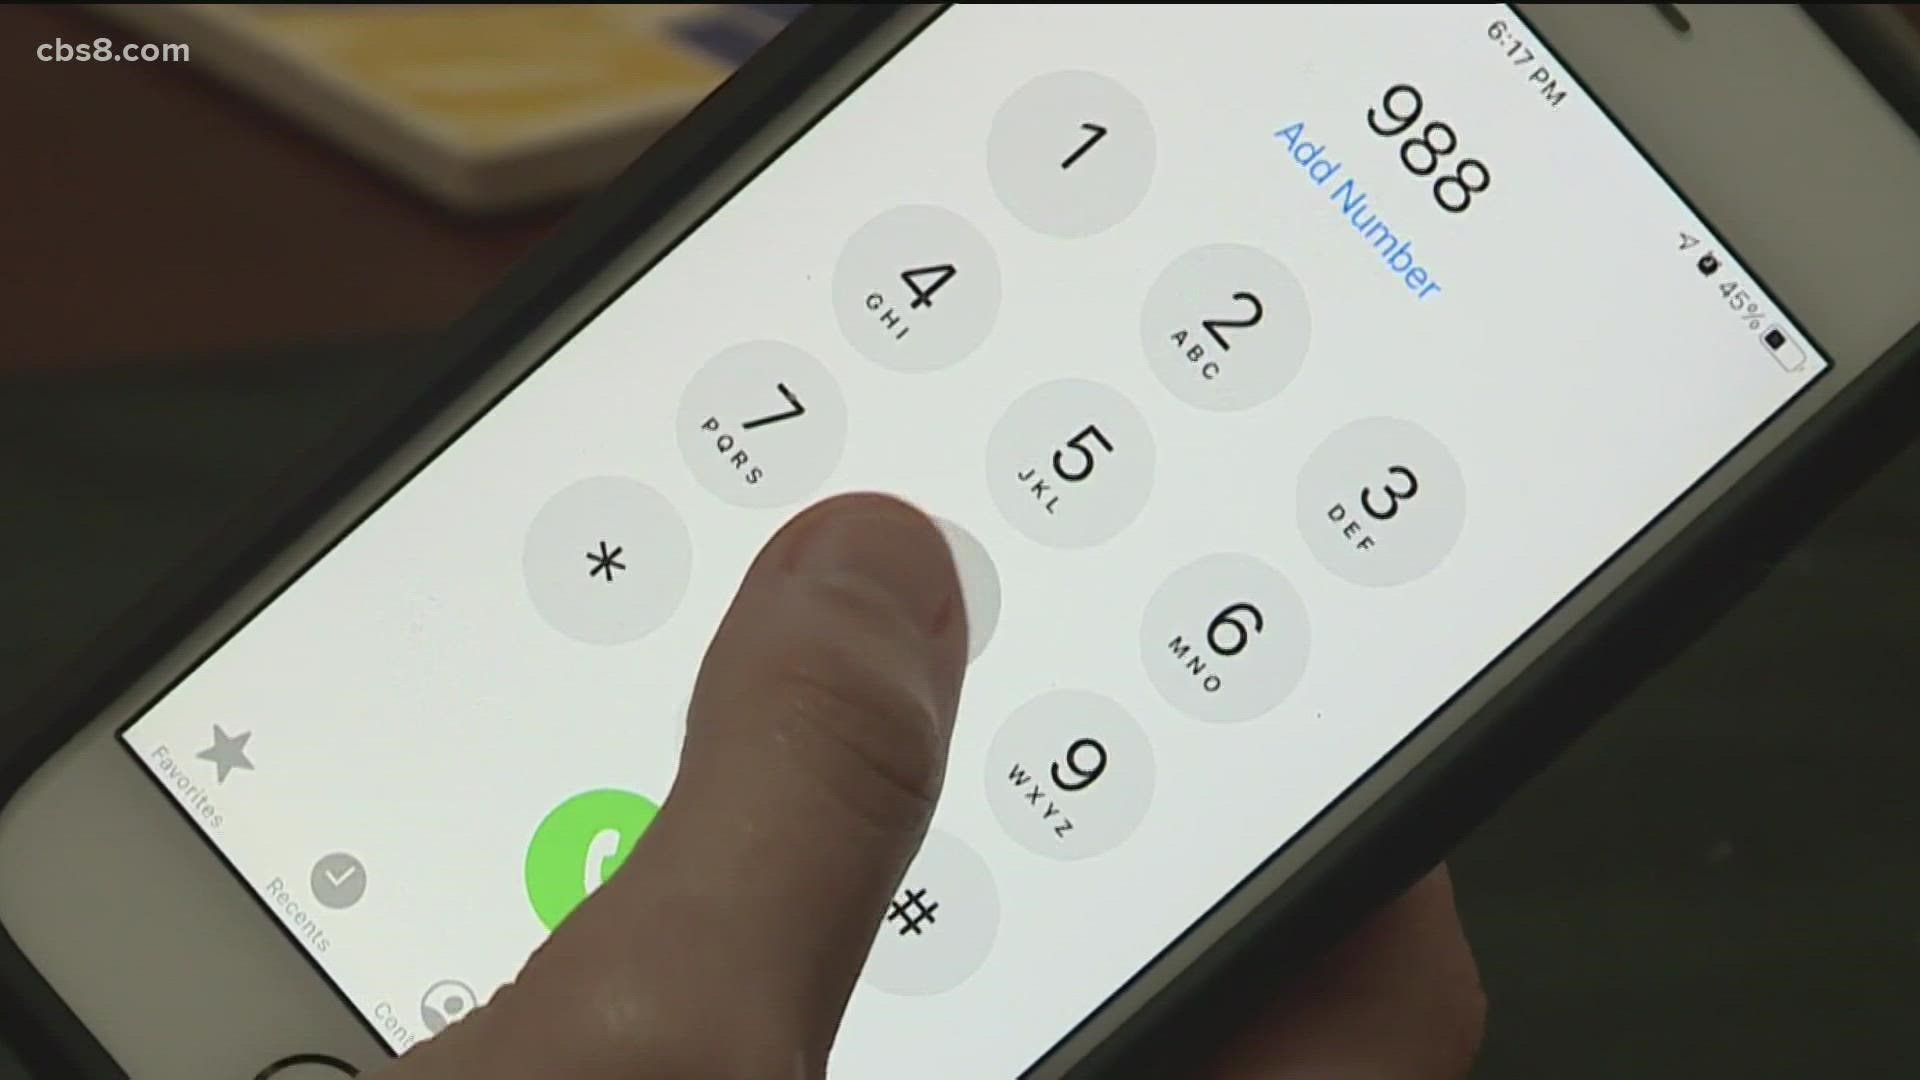 The state recently agreed to spend $20 million funding 9-8-8, which will connect callers directly to crisis centers.